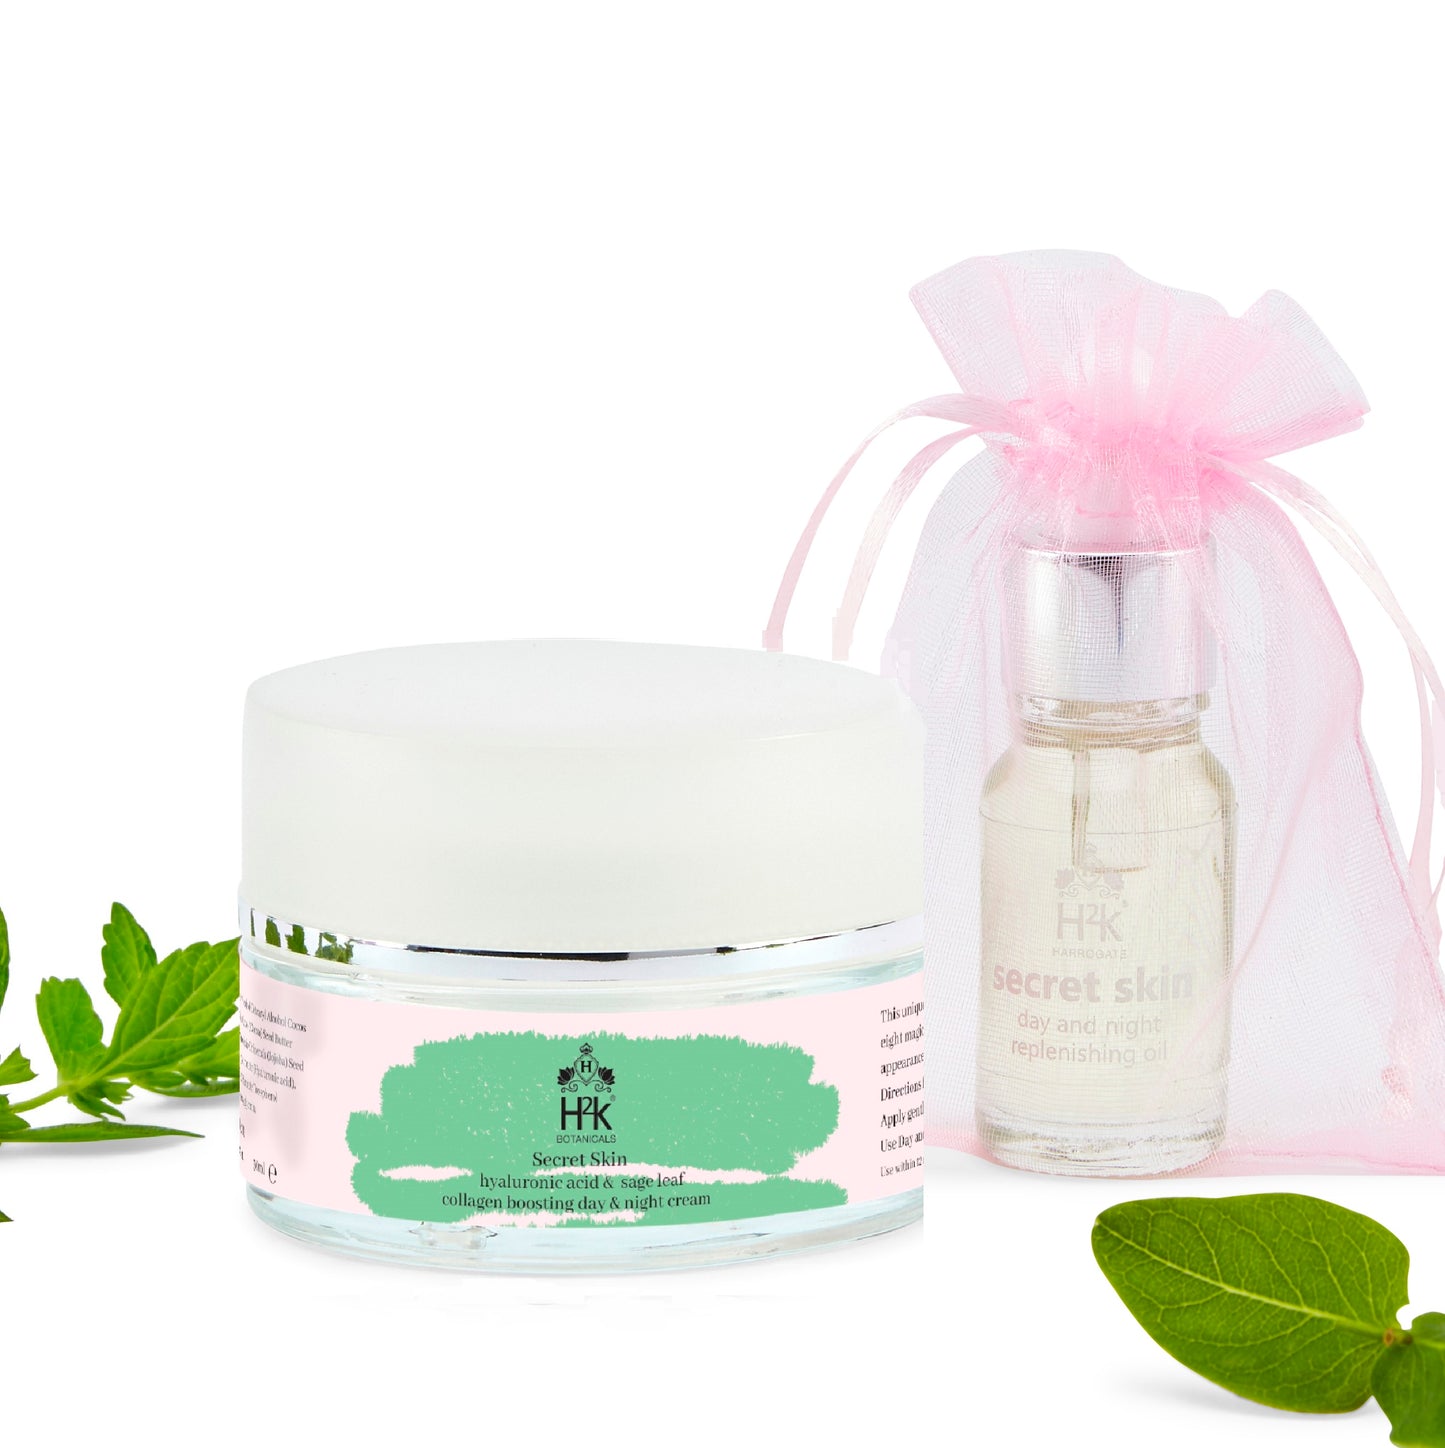 Mini-Day & Night Cream with 10ml Face Oil ...try-me size BACK IN STOCK